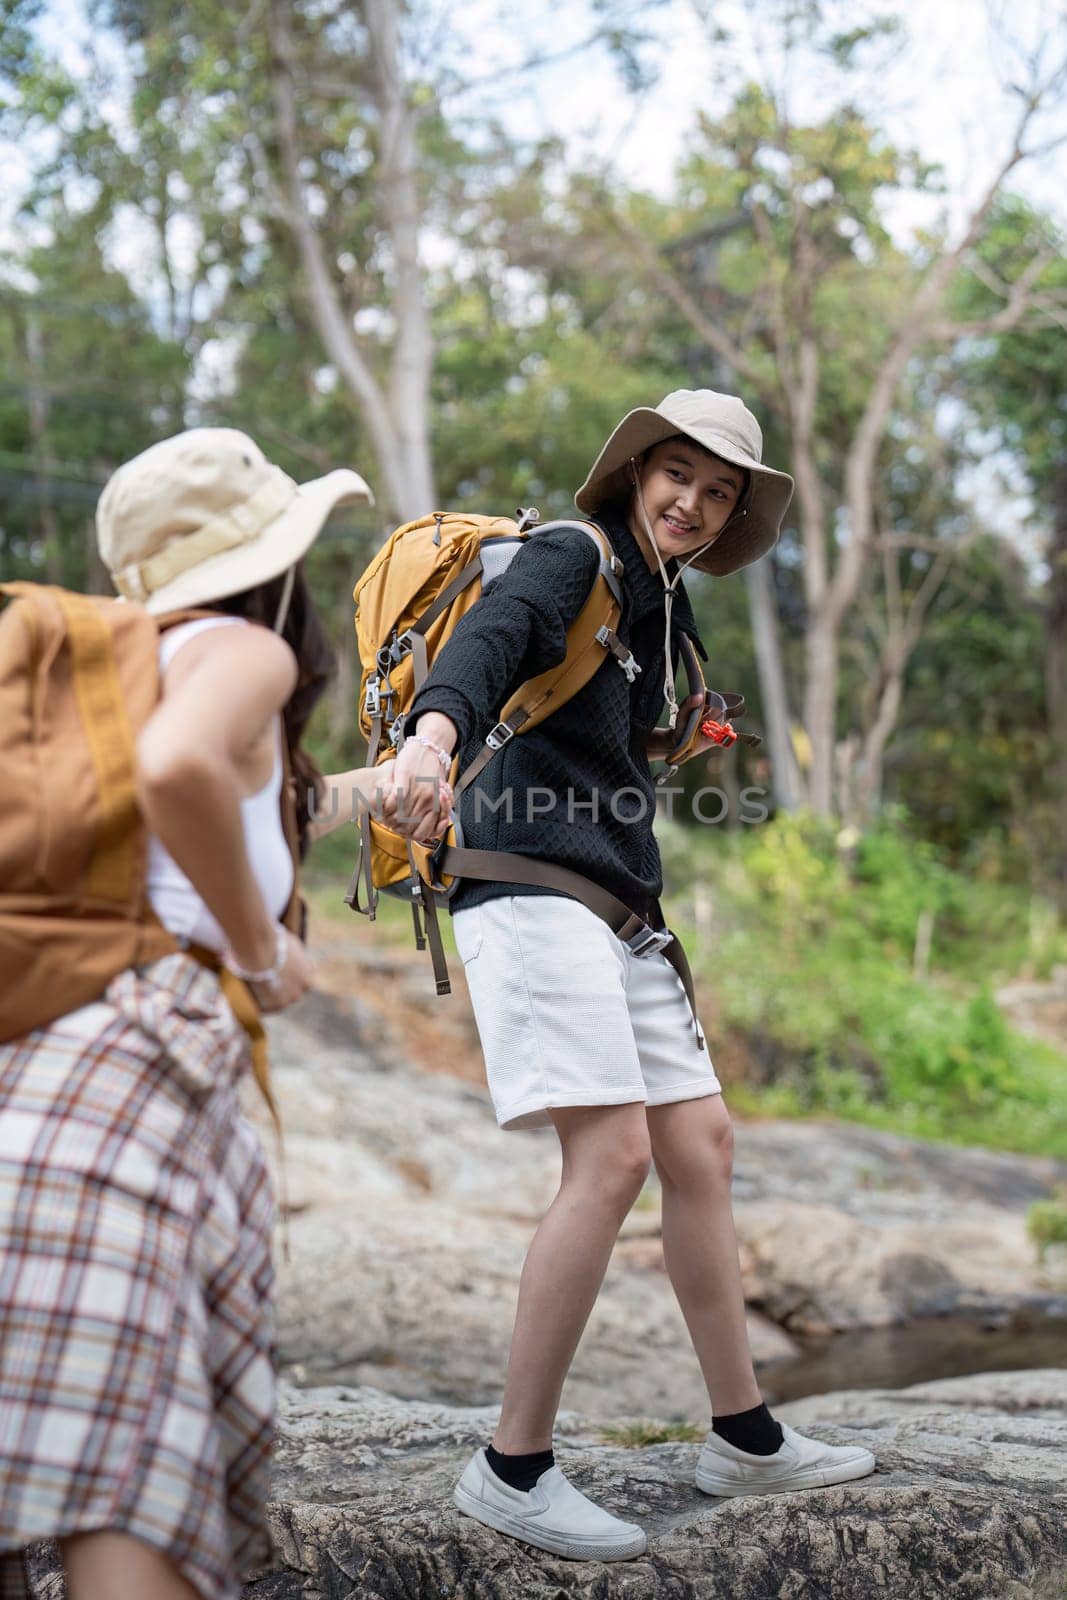 Lovely couple lesbian woman with backpack hiking in nature. Loving LGBT romantic moment in mountains by nateemee